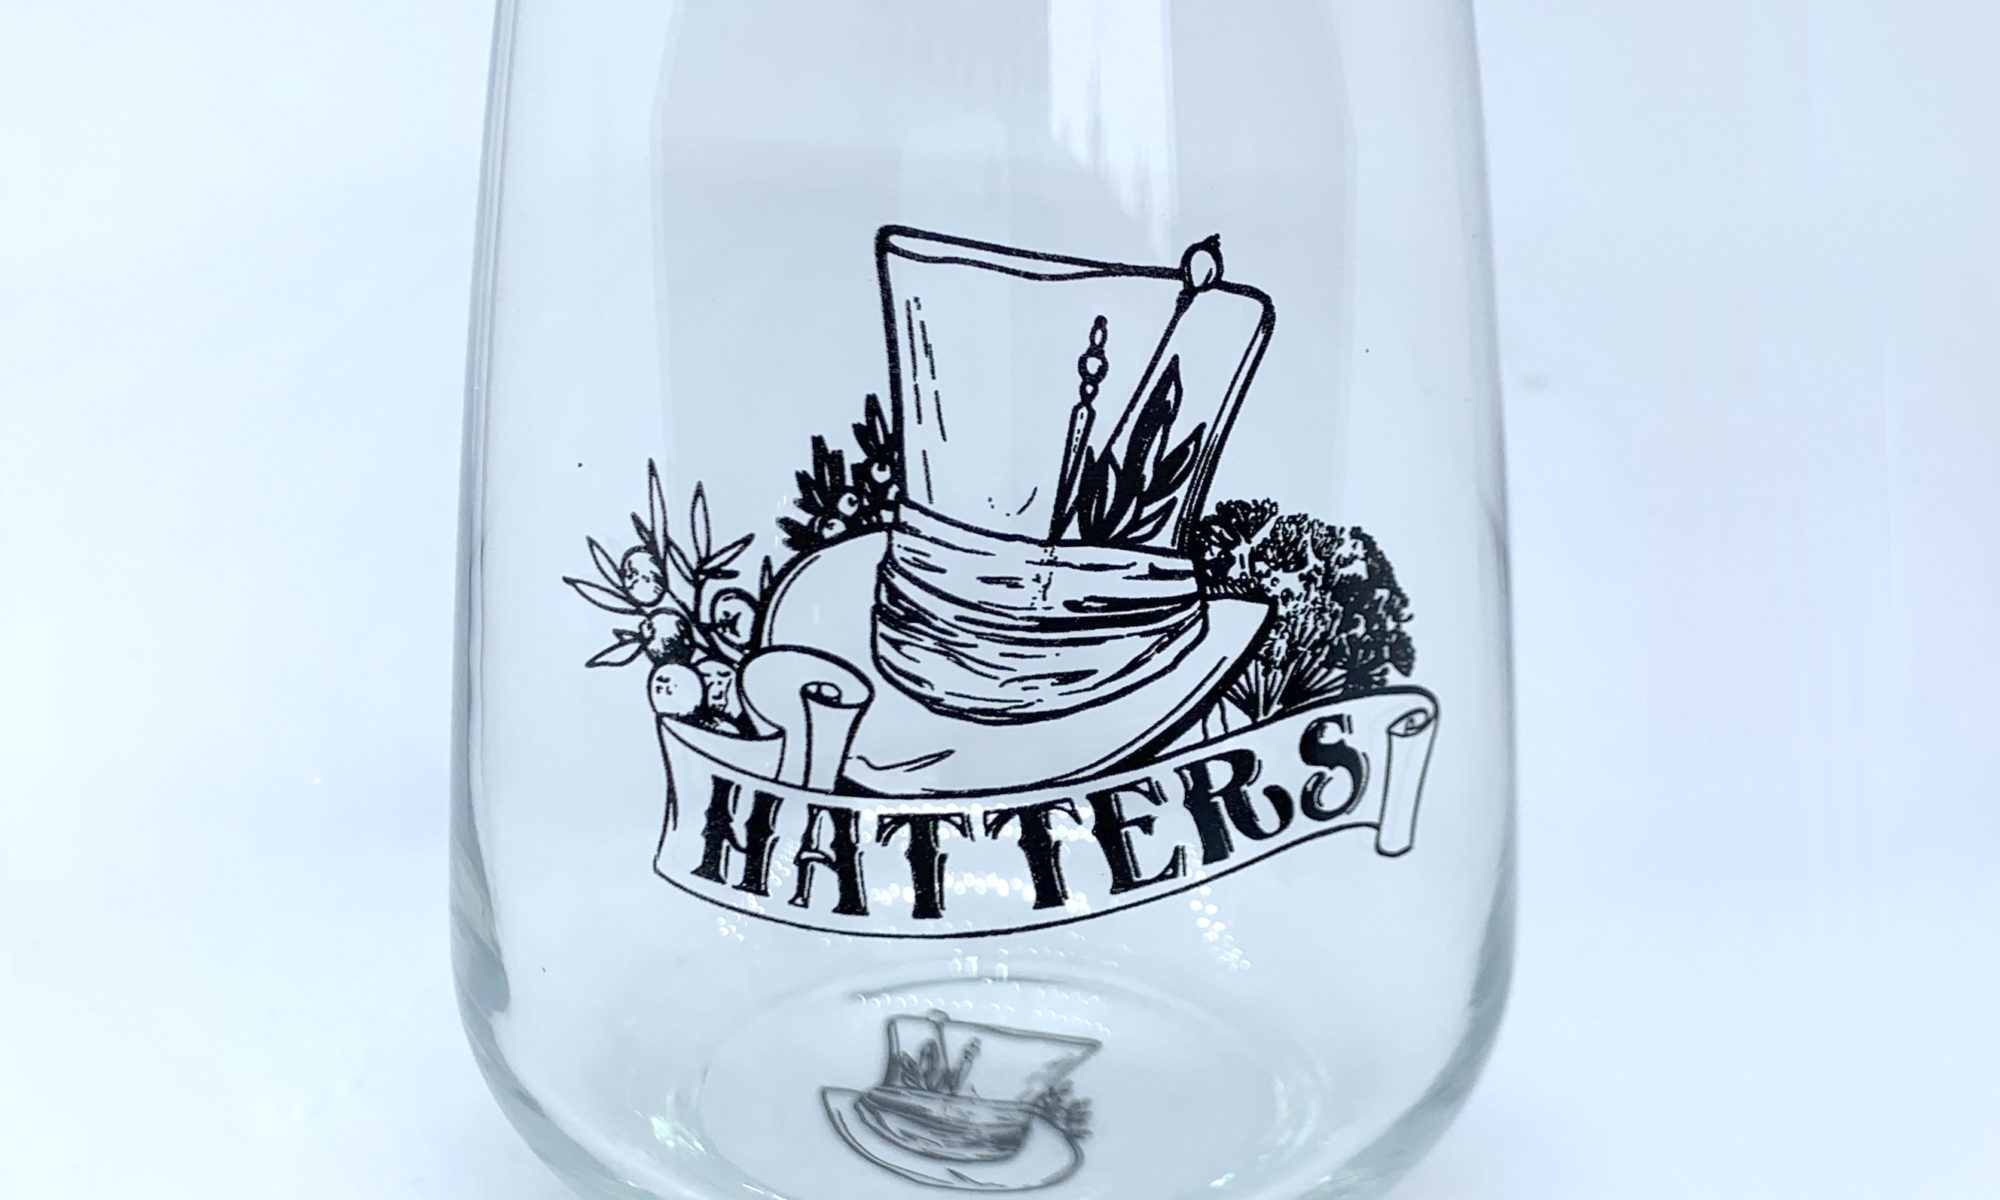 Stemless gin glass with Hatters logo